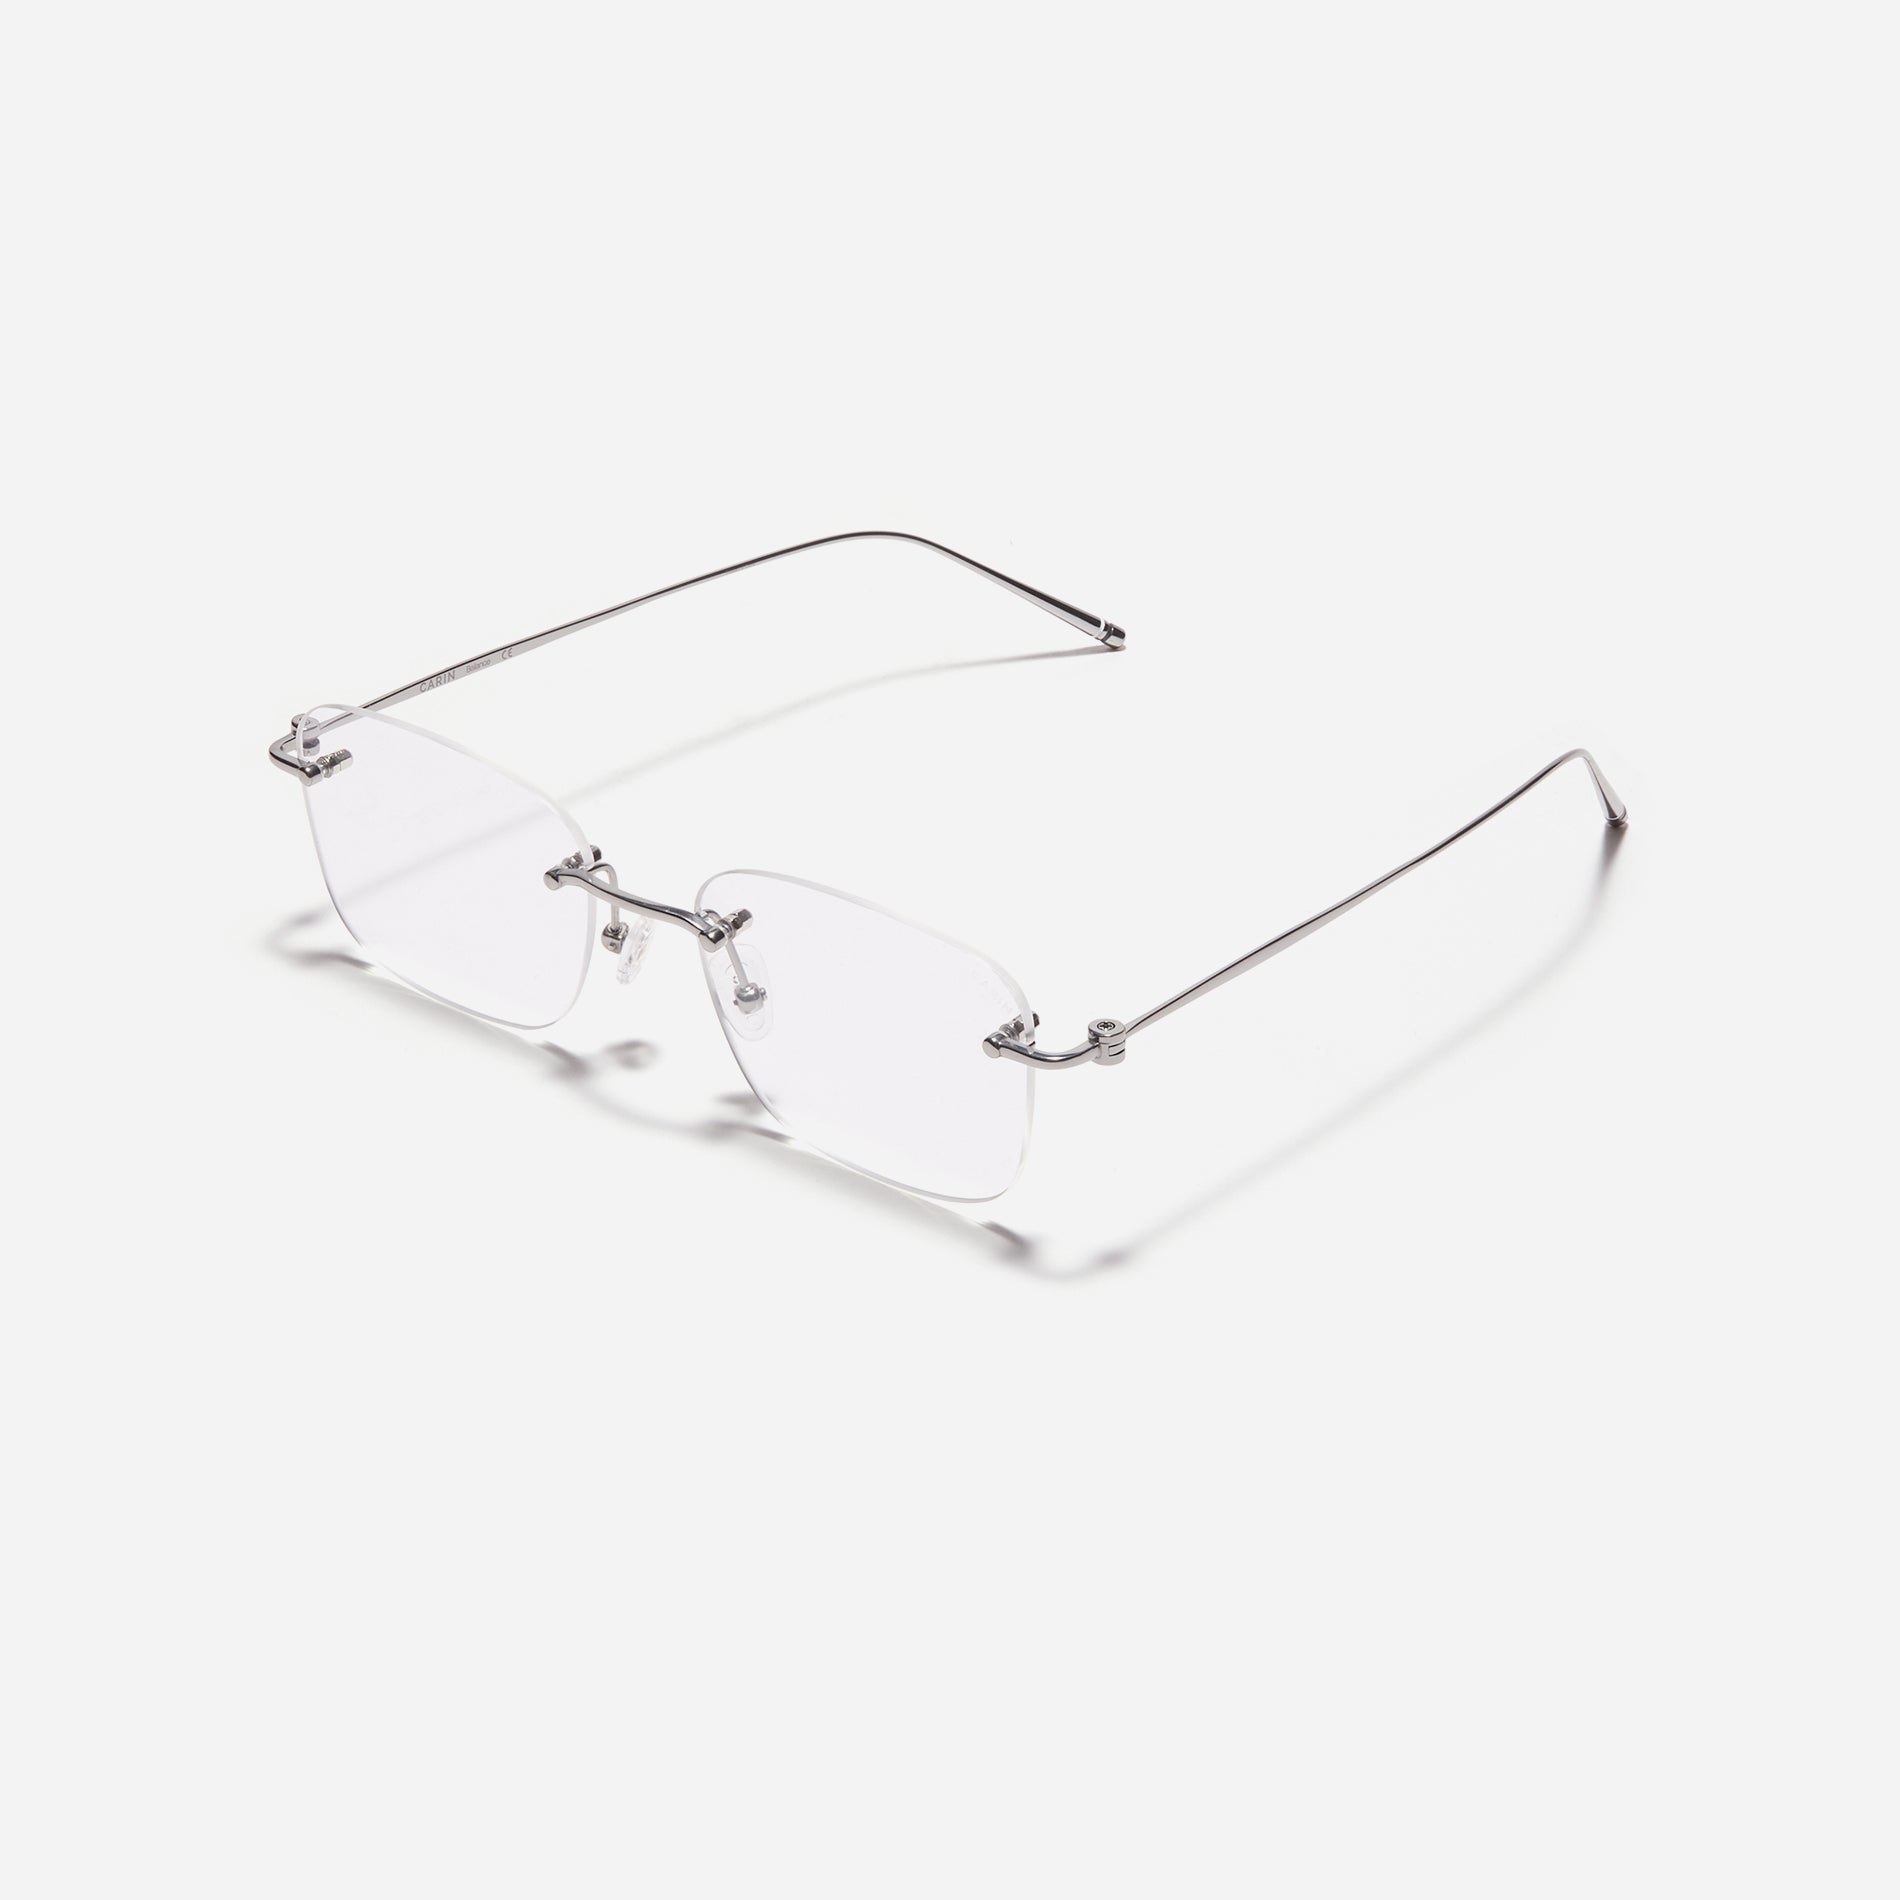 Rimless square-shaped retro eyeglasses. Featuring narrow rims and dual lining on the tips, these eyeglasses ensure a consistently comfortable fit and prevent slipping.